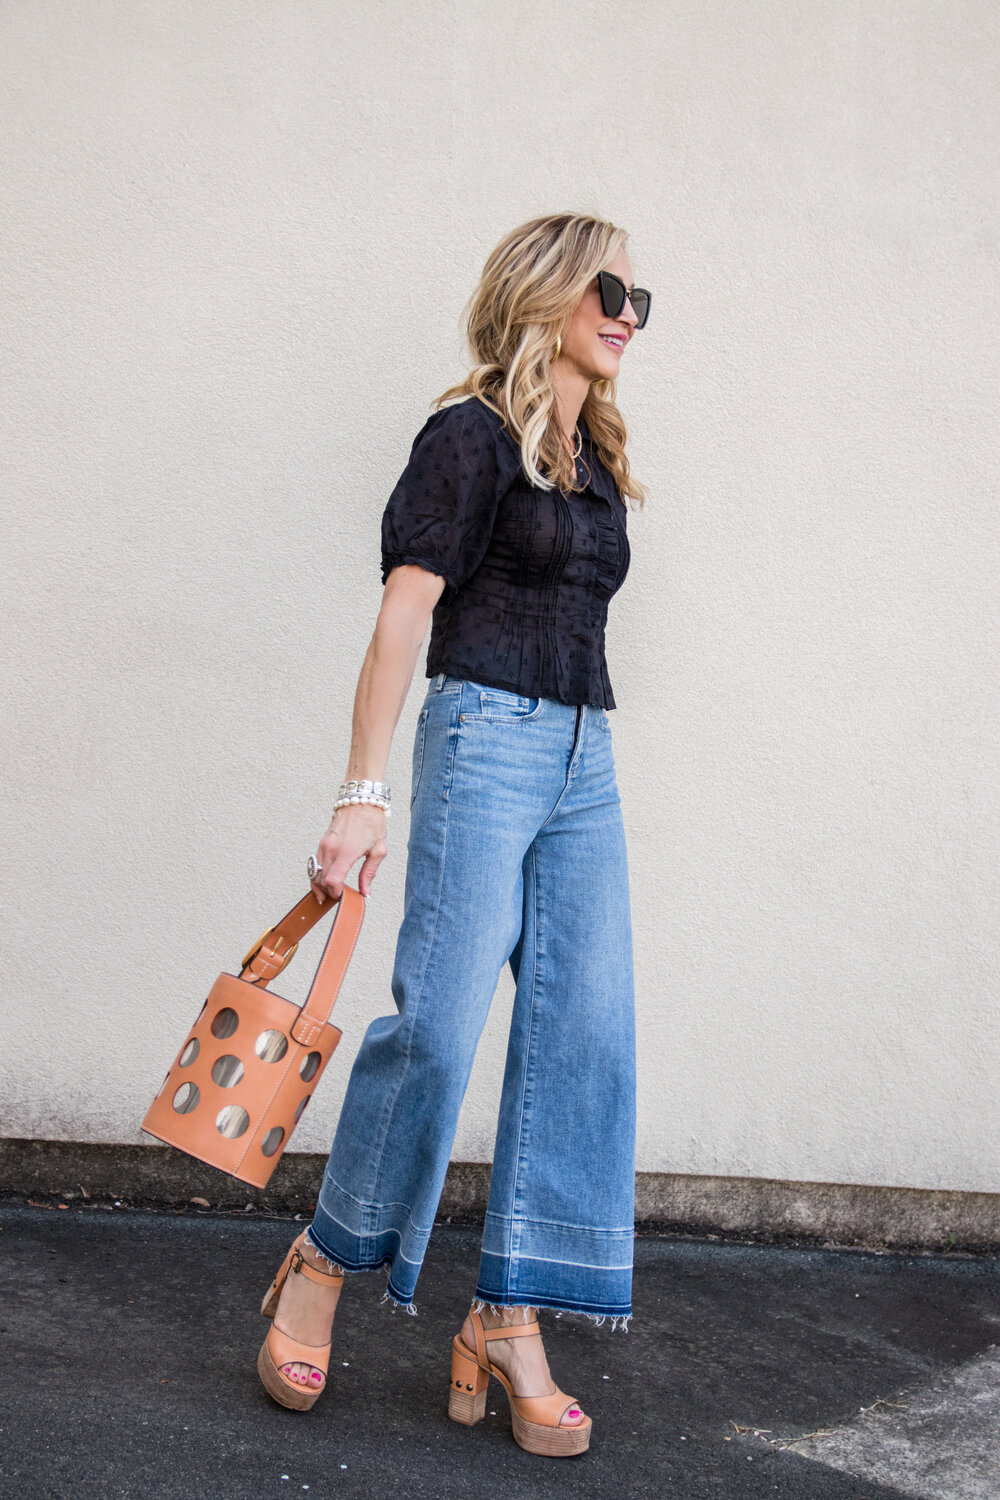 Wearing High Flare Denim With a Cropped Blonde Life